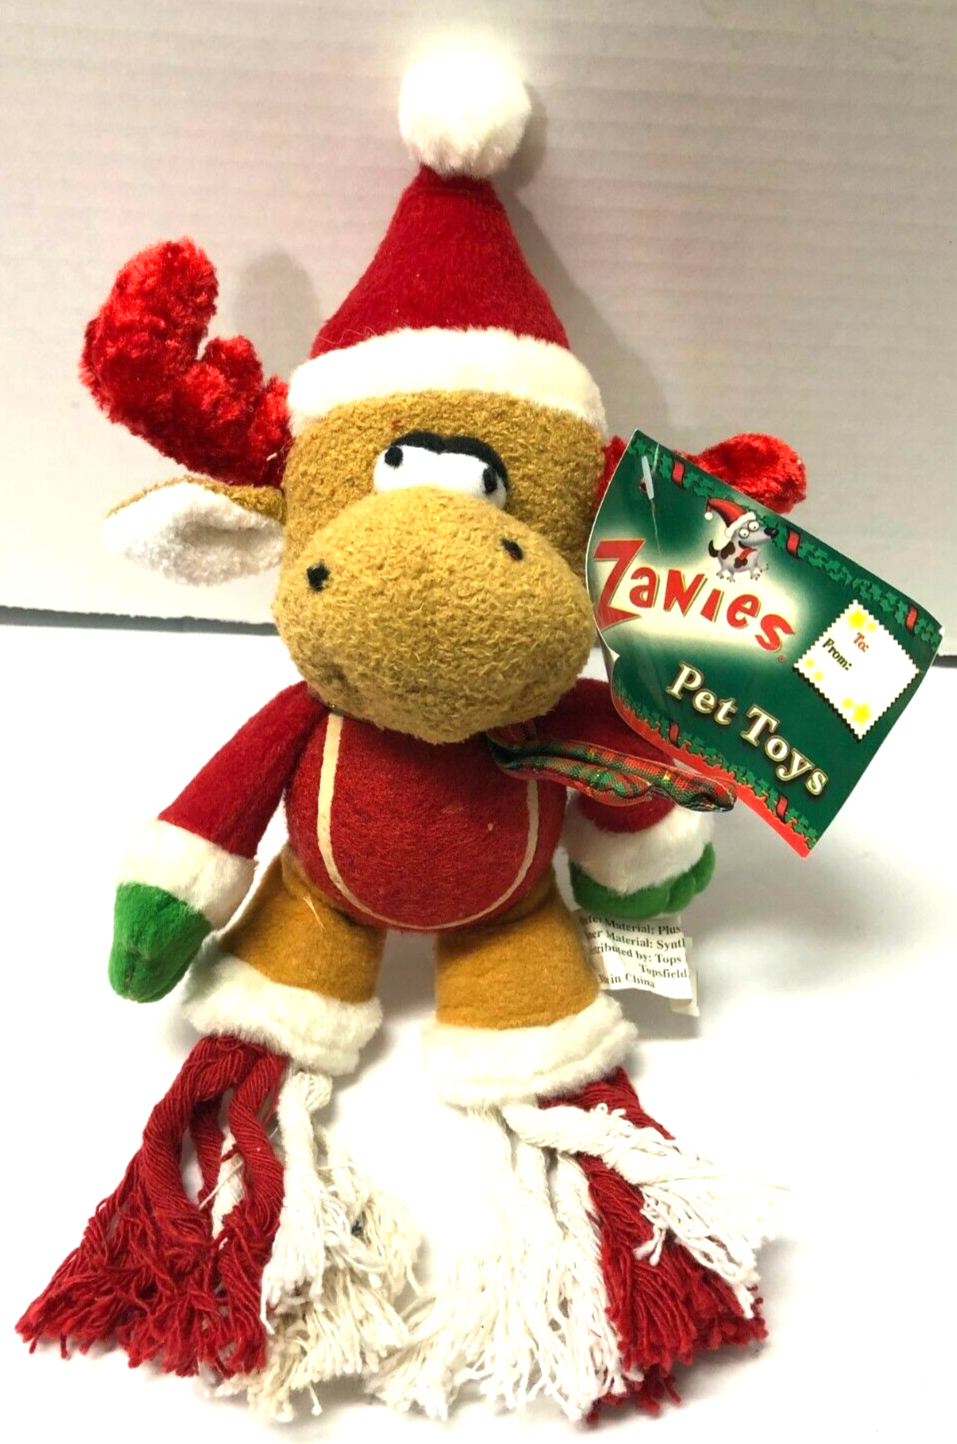 ZANIES Christmas Tennis Ball Body Plush Squeeky Rope Reindeer Dog Puppy Toy NEW - $9.90